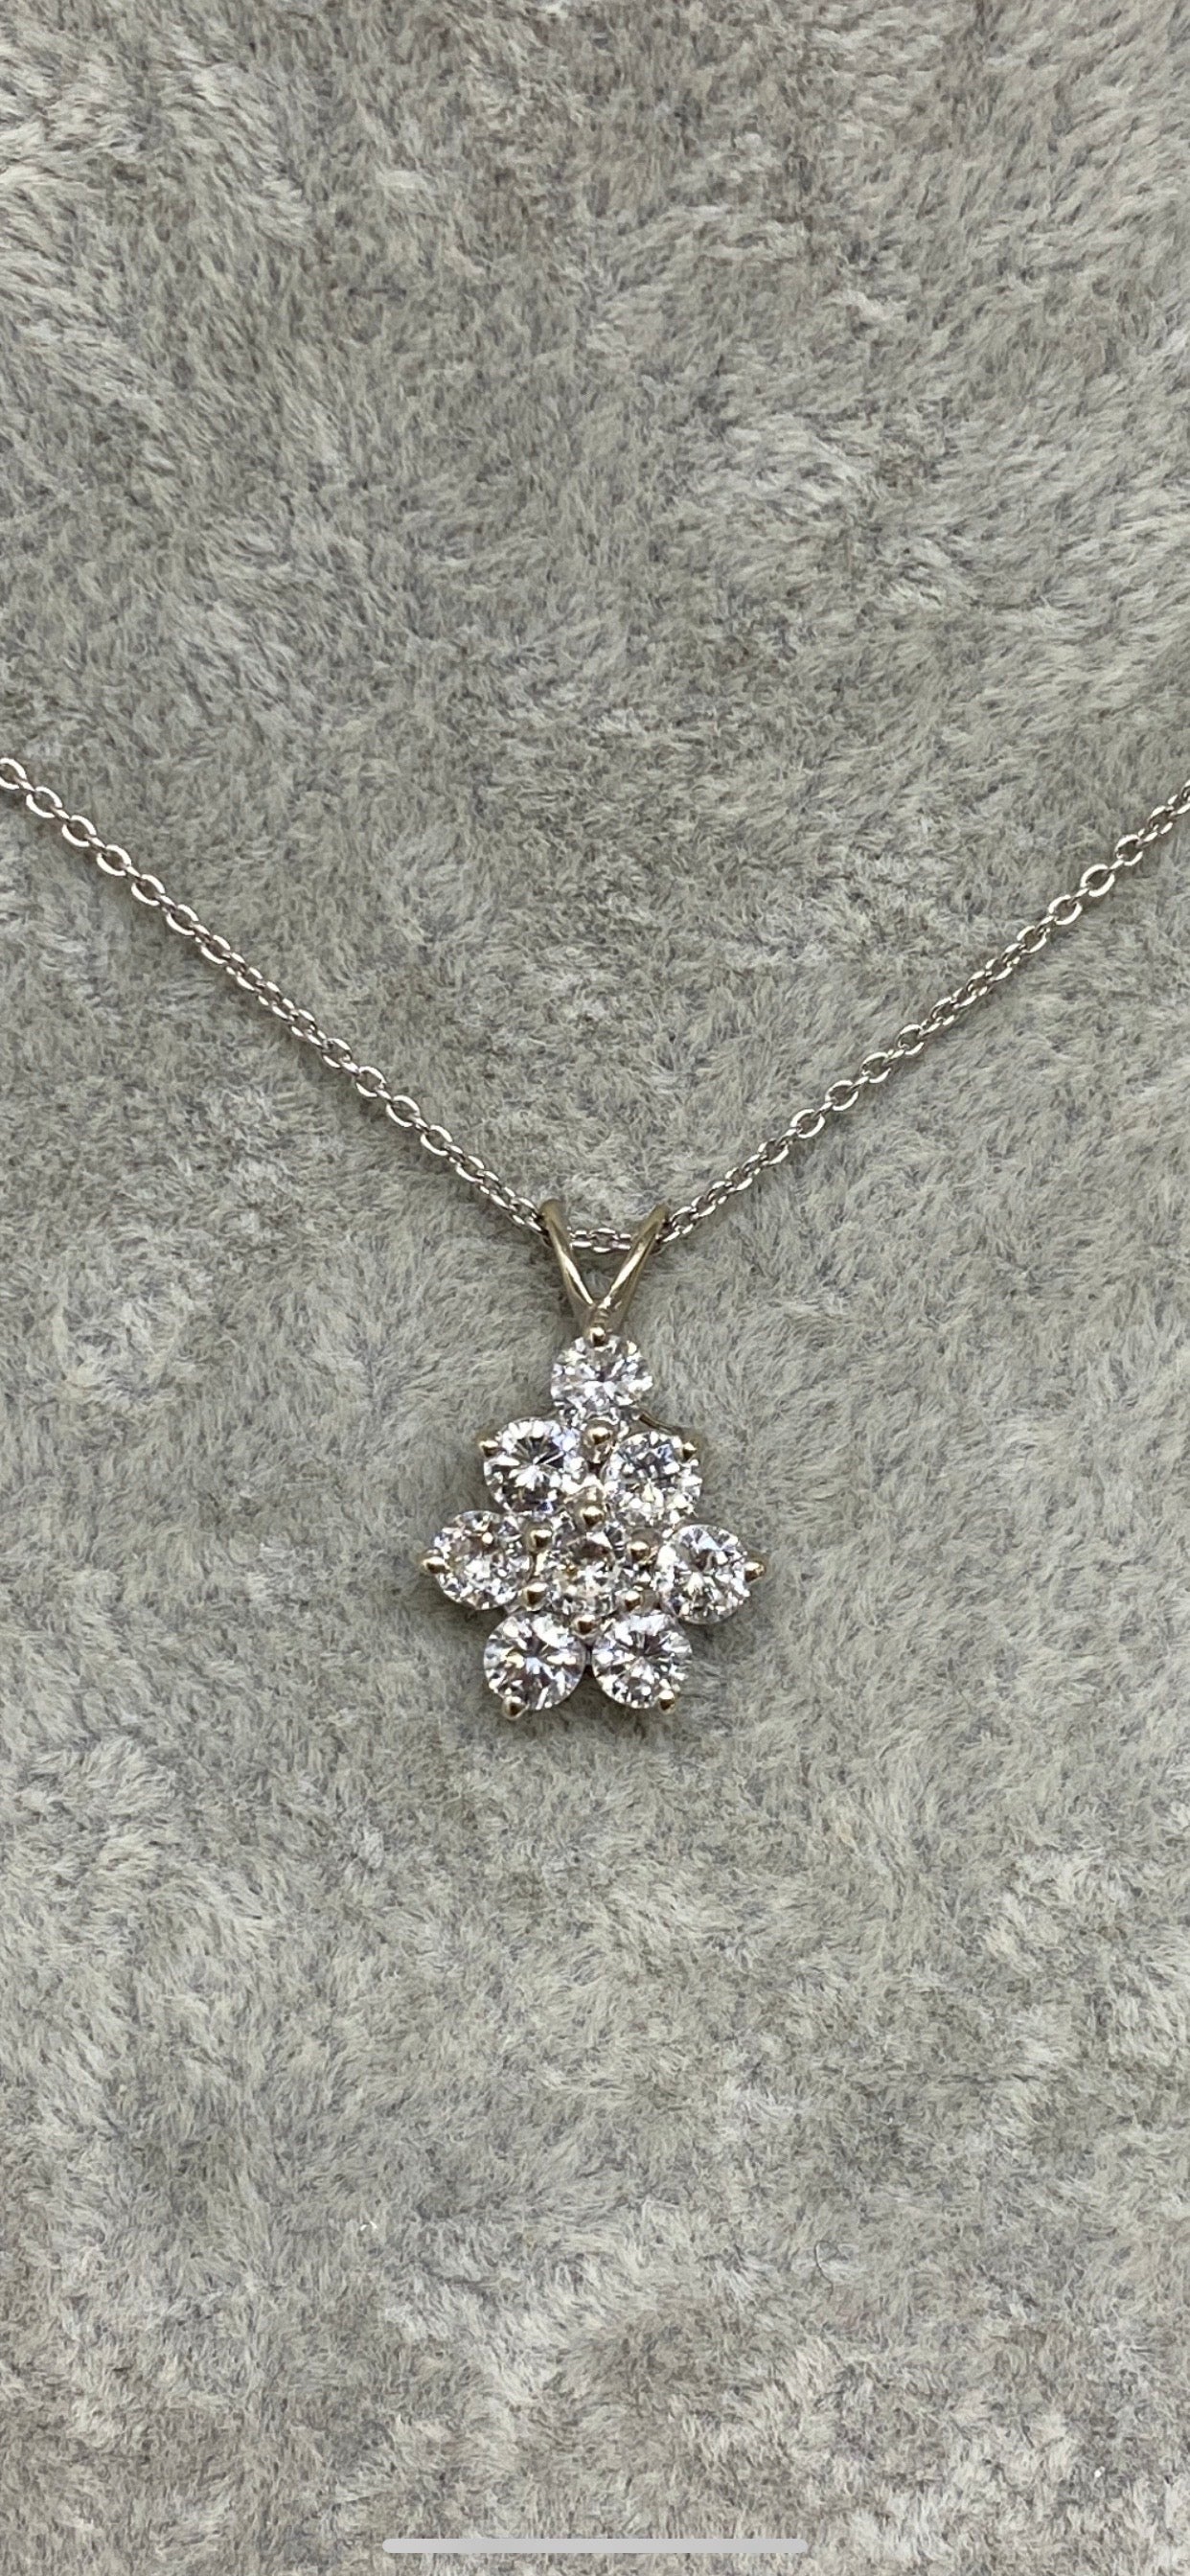 A stunning round cluster drop set in 14k white gold, featuring eight dazzling round brilliant cut natural diamonds. The round brilliant cut shape maximizes the reflection of light, enhancing the pendant's sparkle and are well-matched in terms of